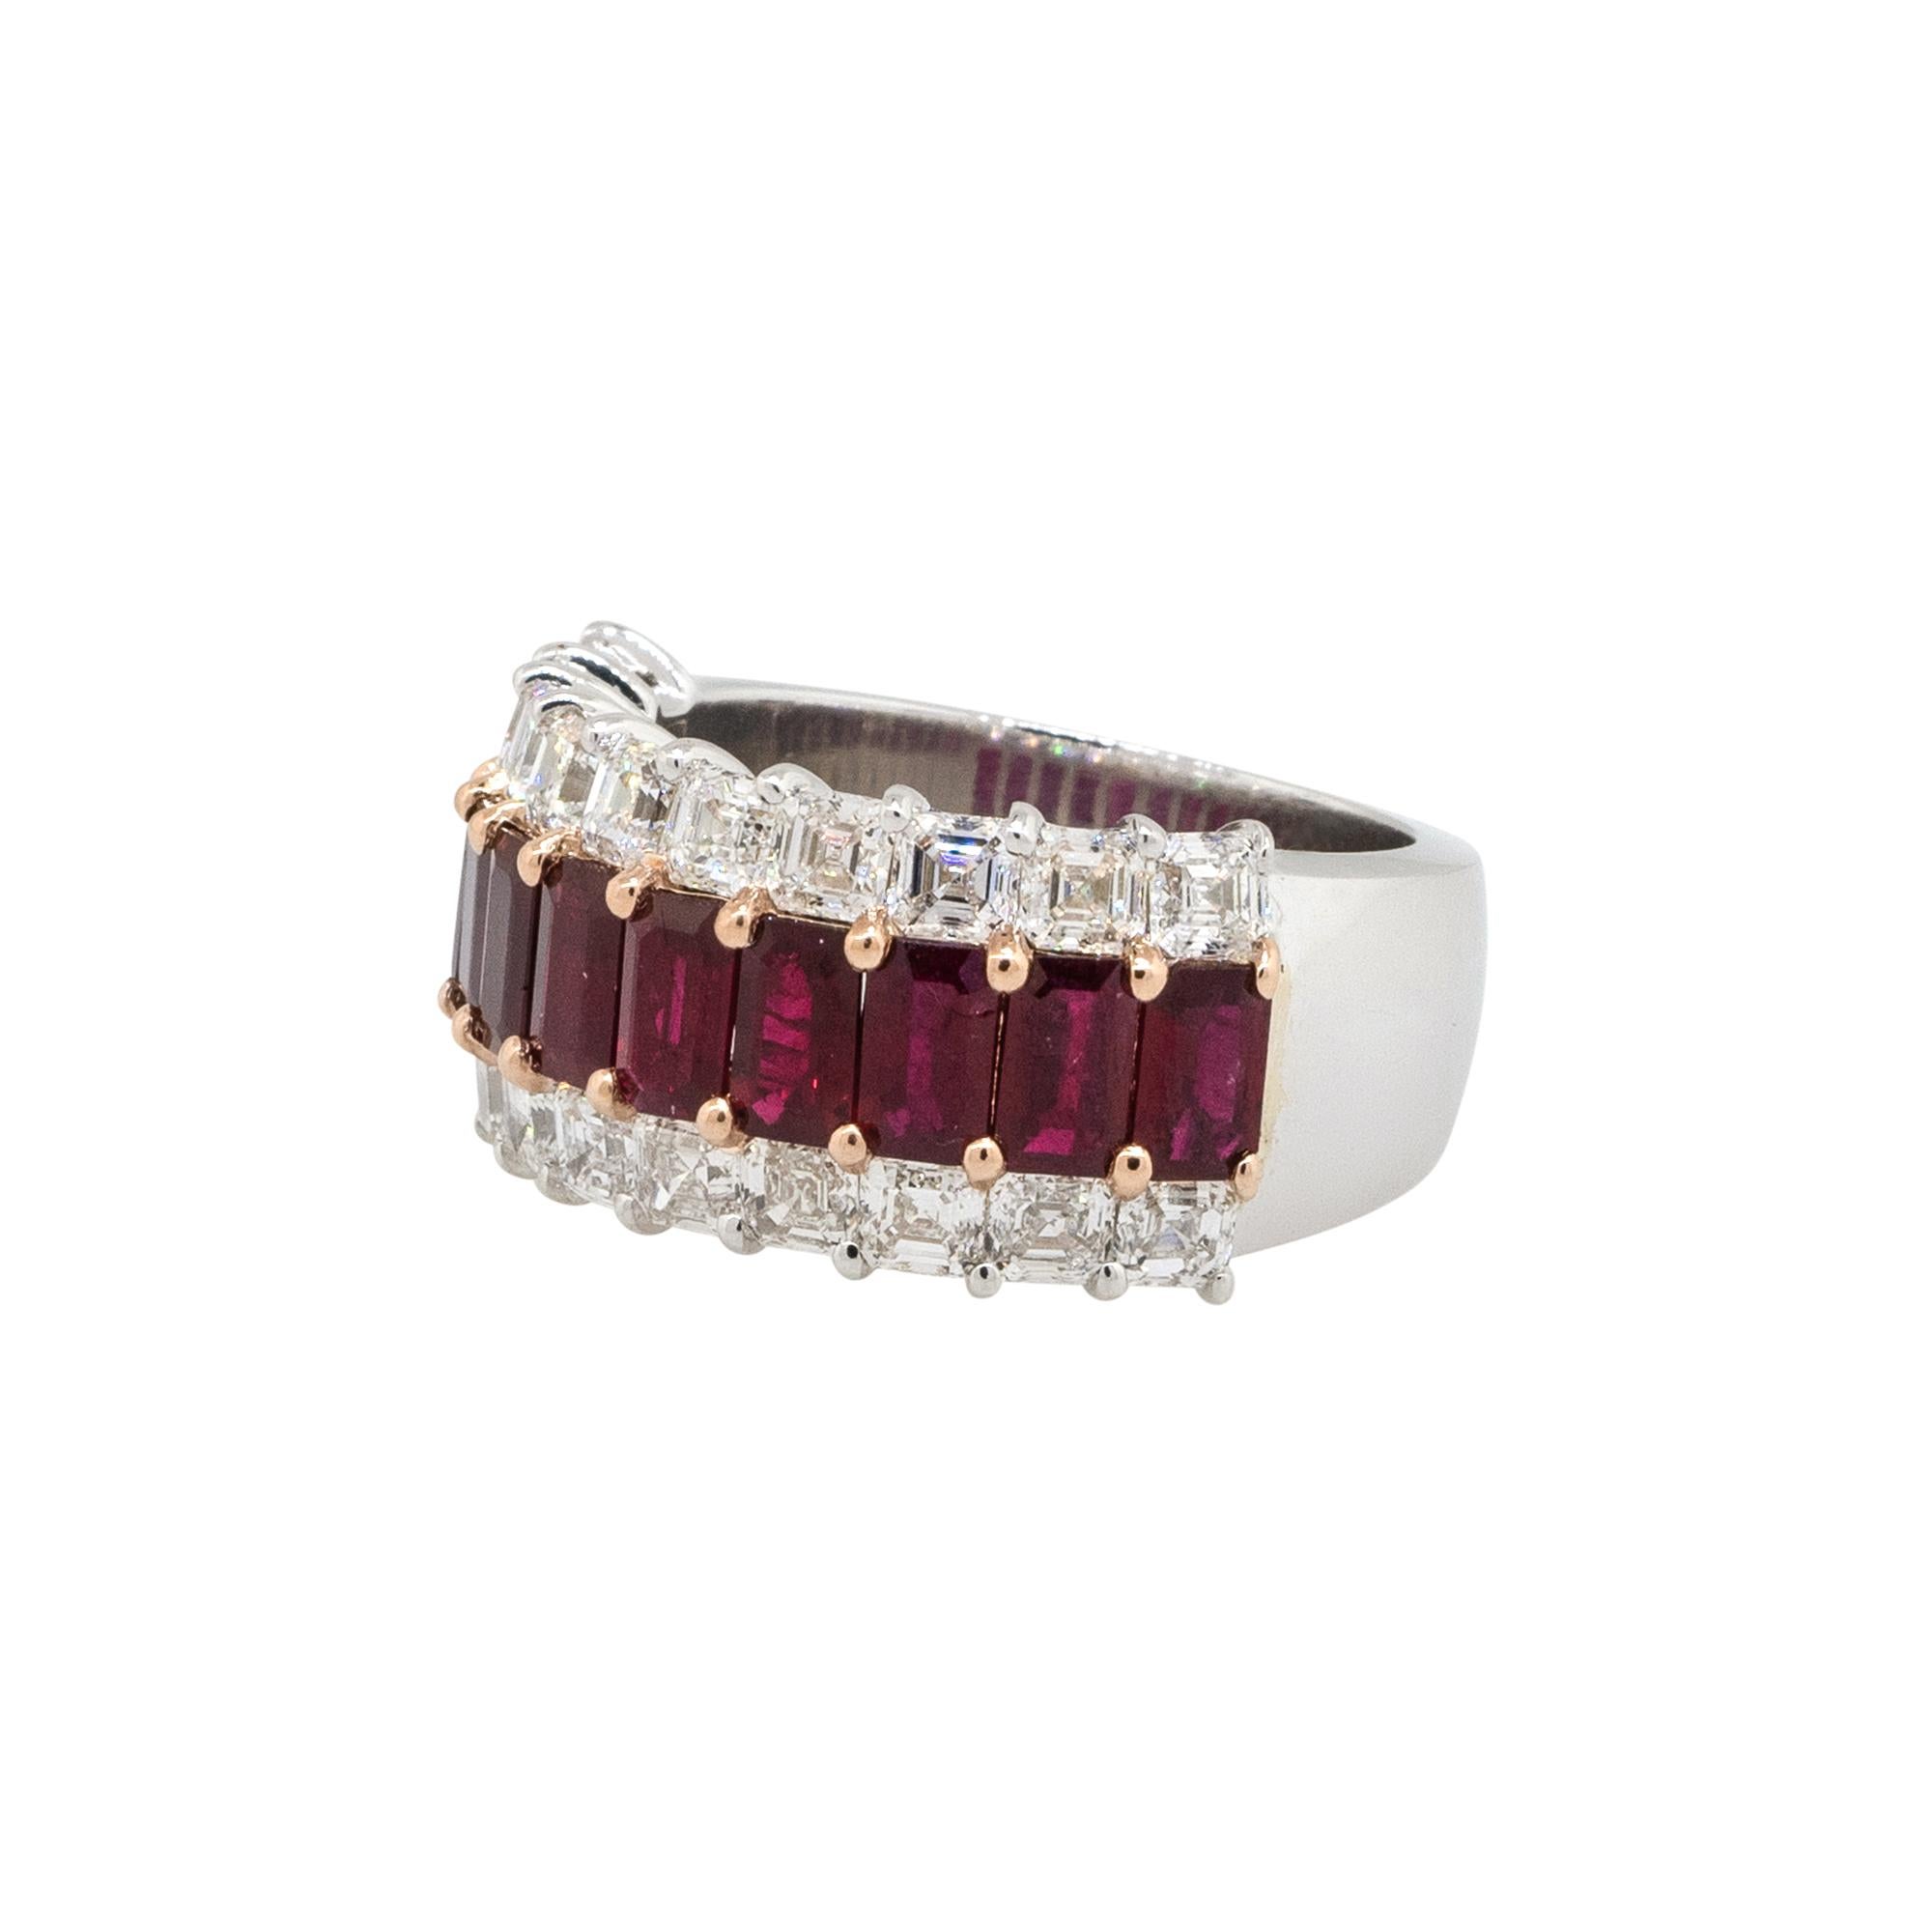 Material: 18k White Gold
Gemstone details: Approx. 3.15ctw of Ruby gemstones
Diamond details: Approx. 2.90ctw of asscher cut Diamonds. Diamonds are G/H in color and VS in clarity
Ring Size: 7
Ring Measurements: 24.5mm x 11.30mm x 23.40mm
Total